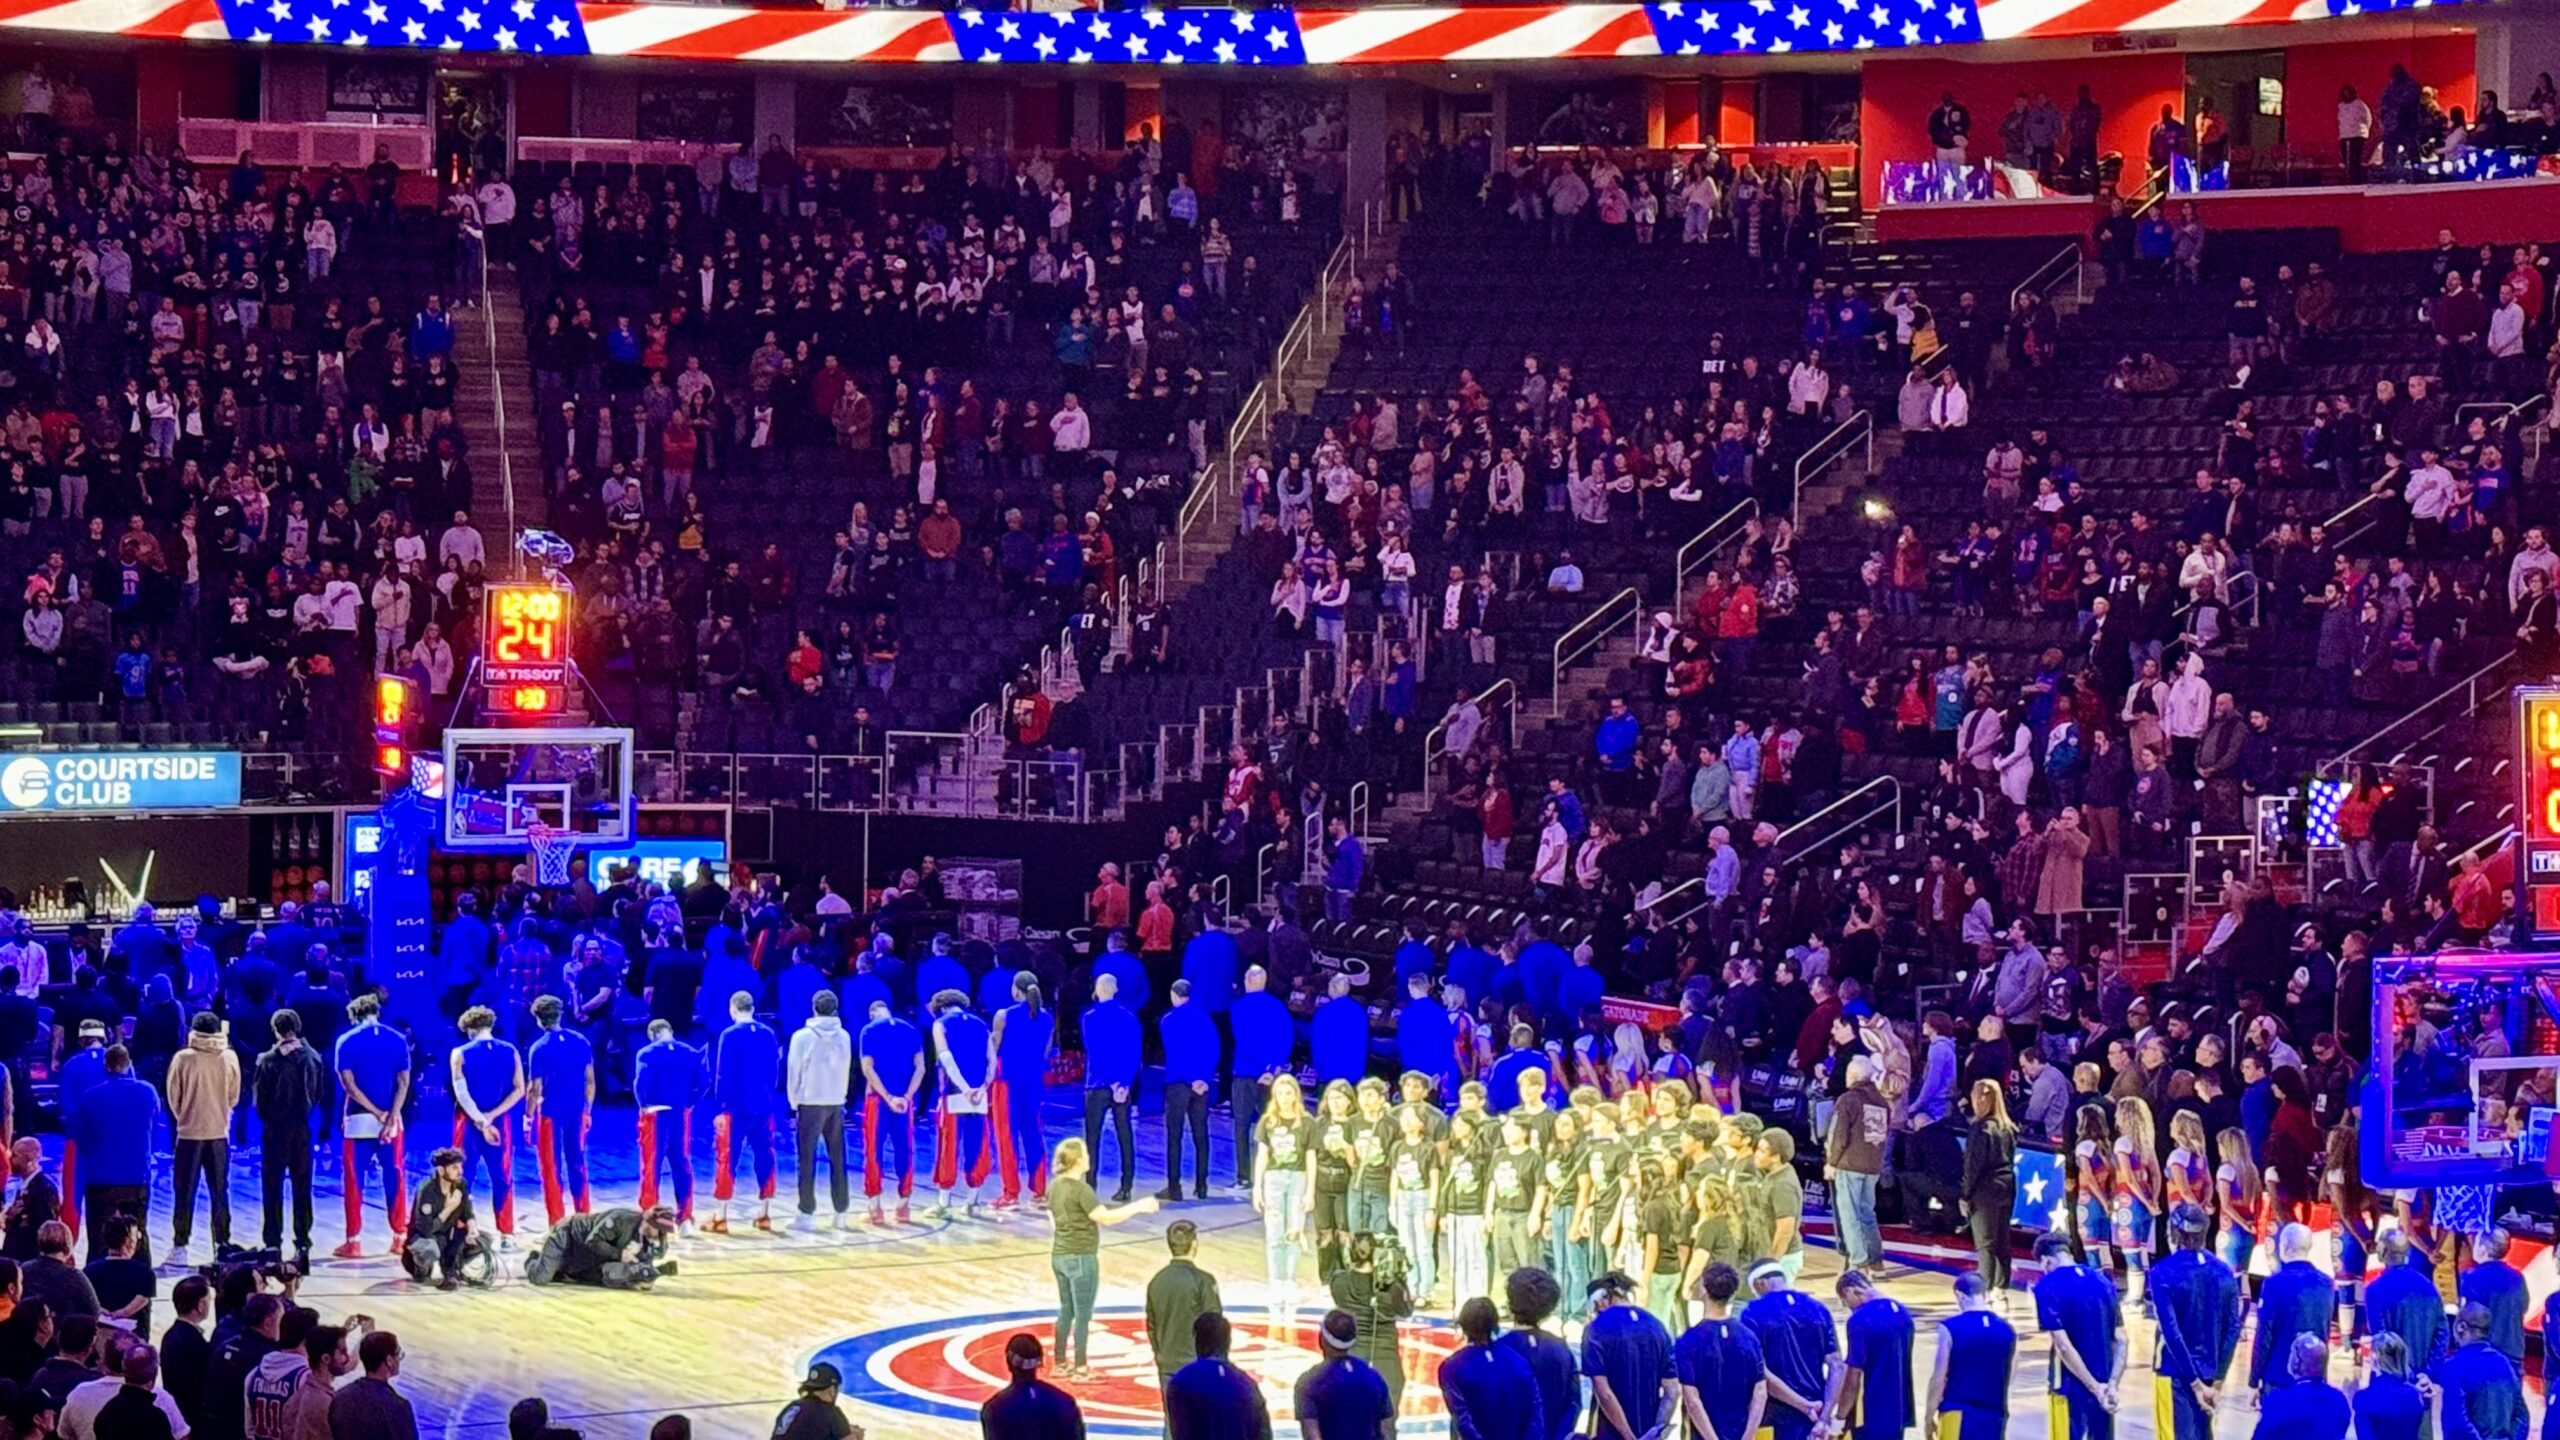 Detroit Pistons vs Indiana Pacers in Detroit, MI at Little Caesars Arena. Article by Brandon Dent. Photo Credit: Brandon Dent.